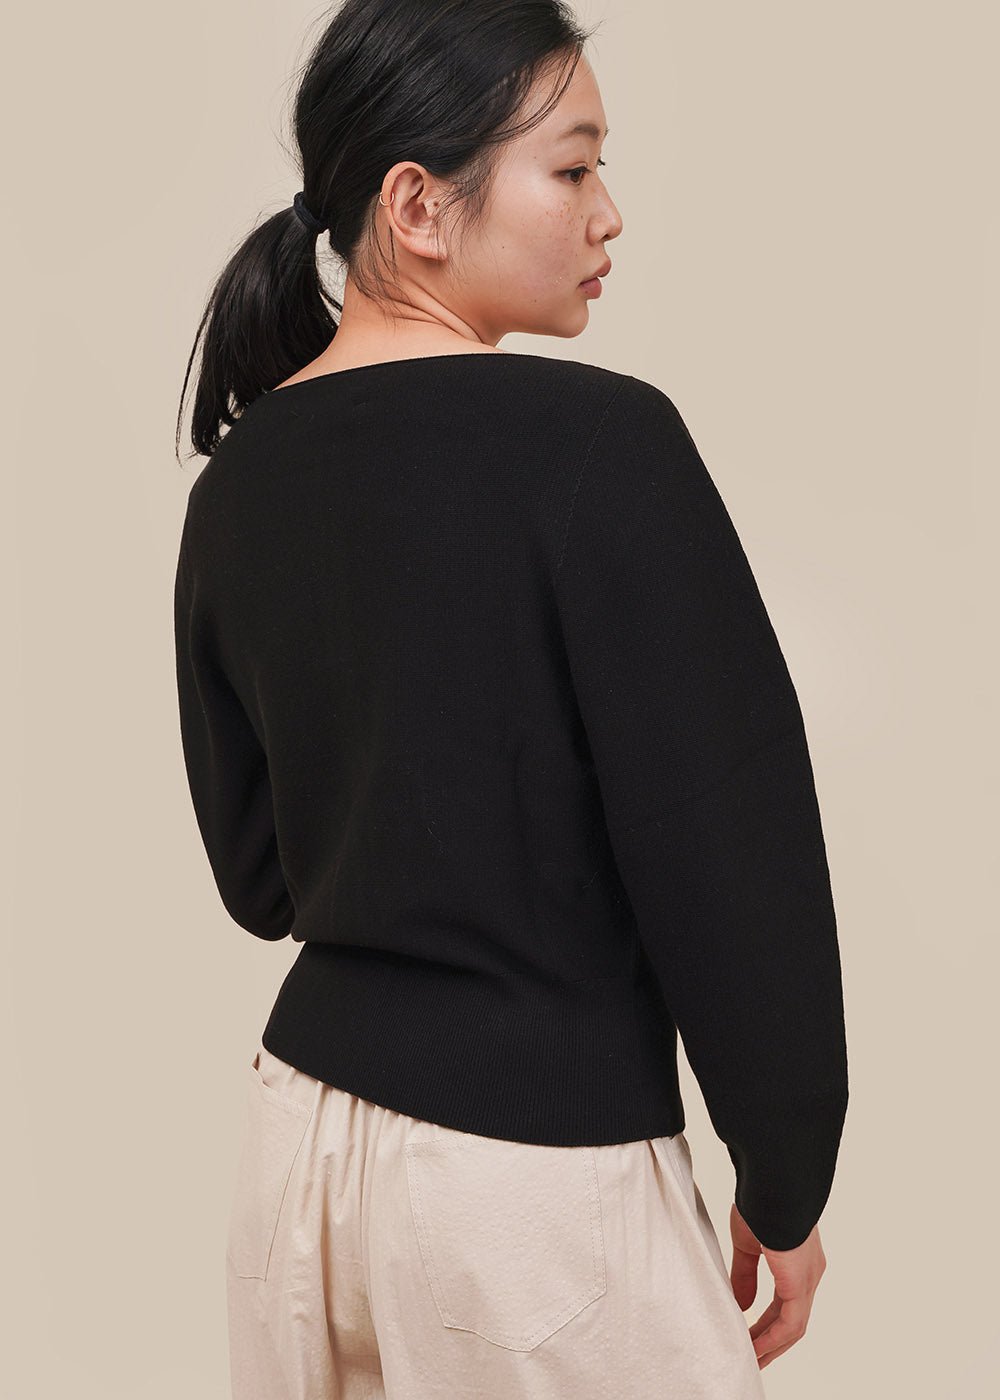 Whole Garment Rounded Cardigan in Black by AMOMENTO – New Classics